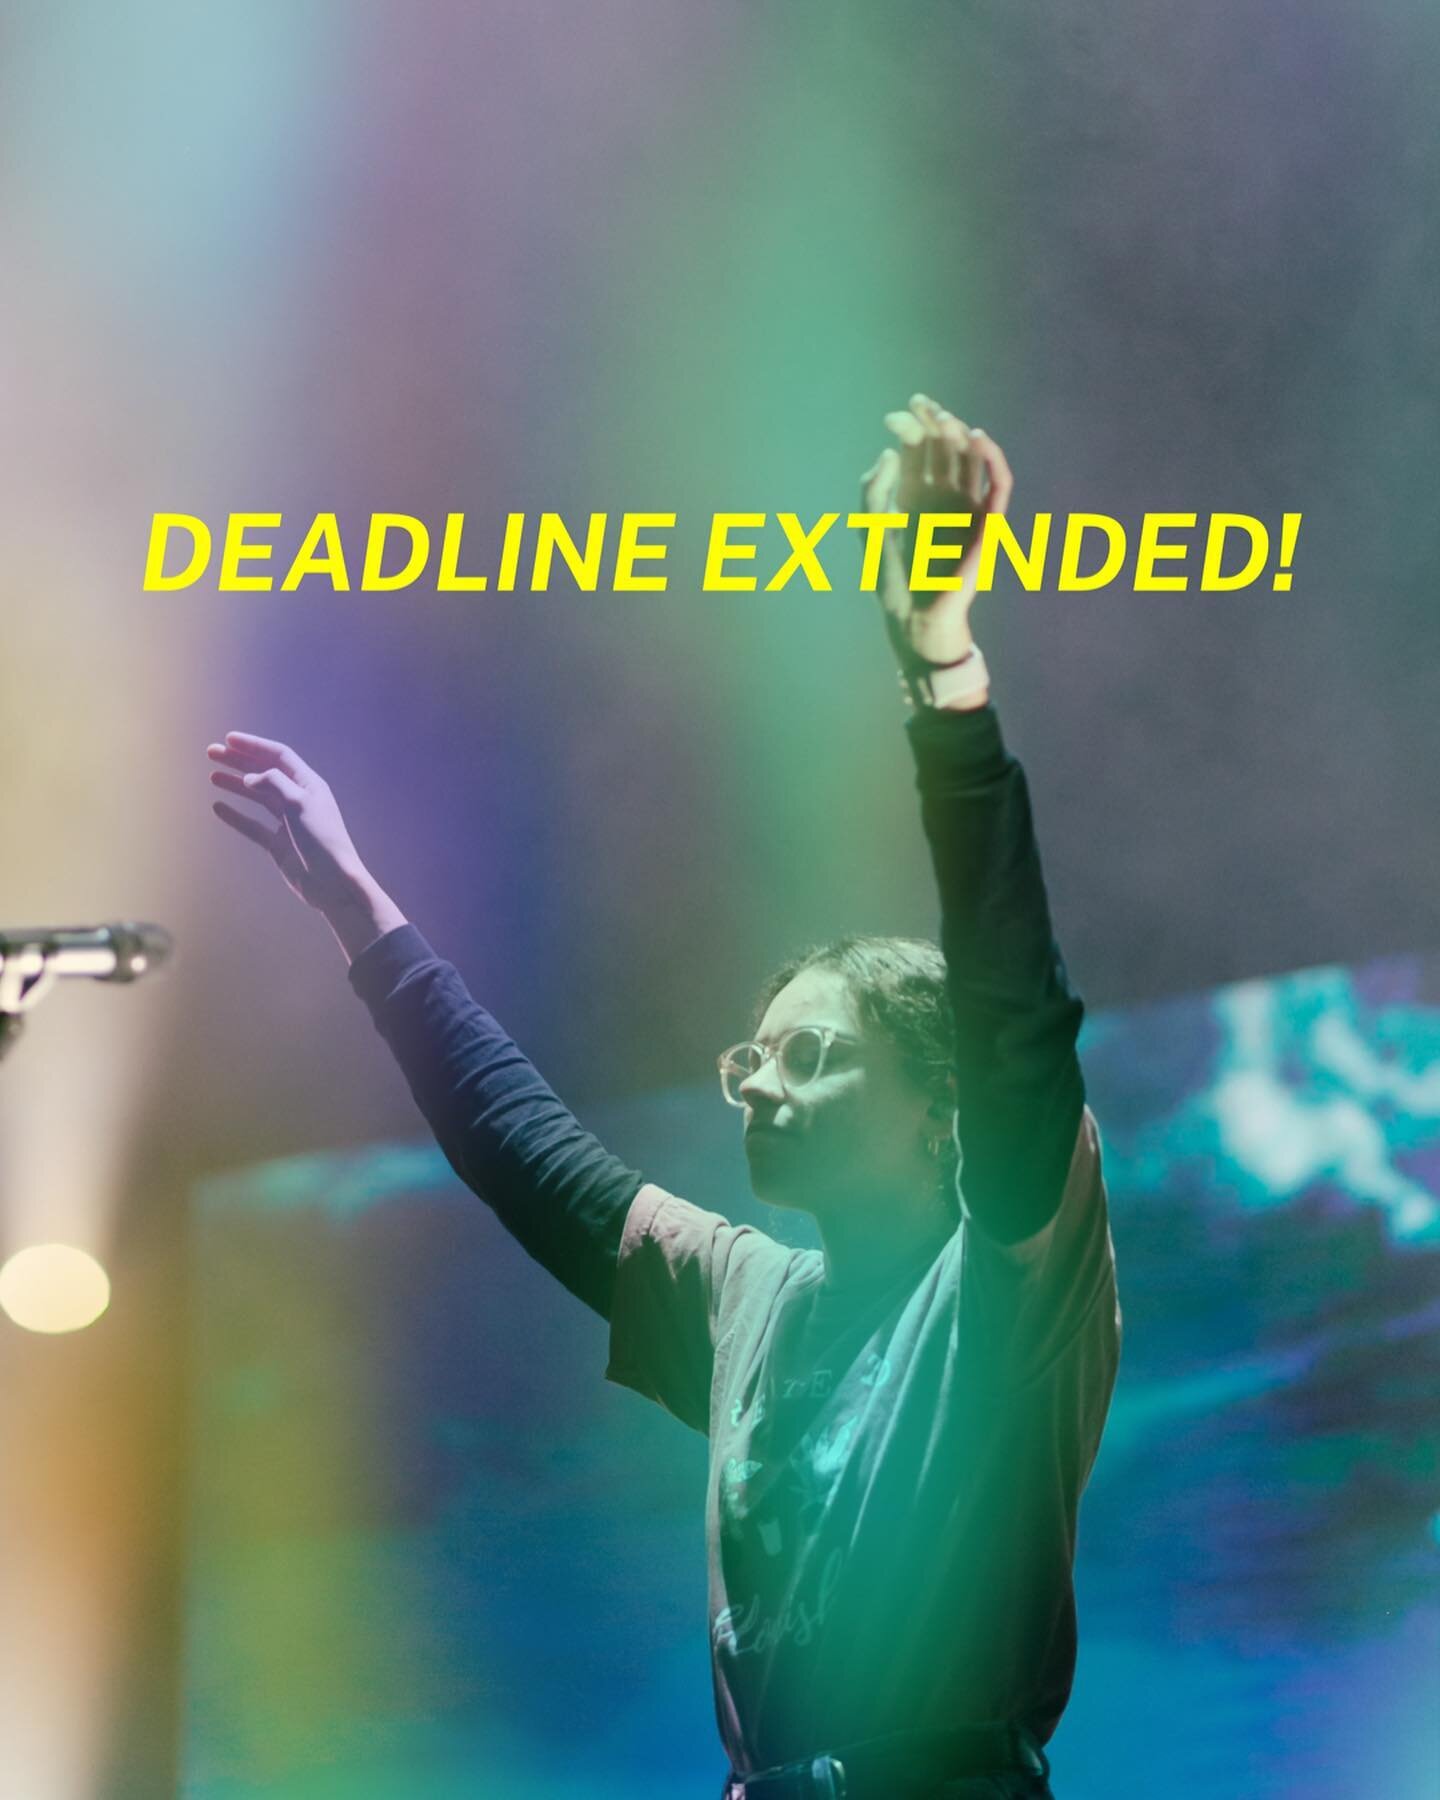 DEADLINE EXTENDED!

Applications for the upcoming @visiblemc school year are now due July 15! 

If you have a passion for music, production, music business, or creative leadership, head to LIFECENTERWORSHIP.COM to apply for the 2021-2022 school year.